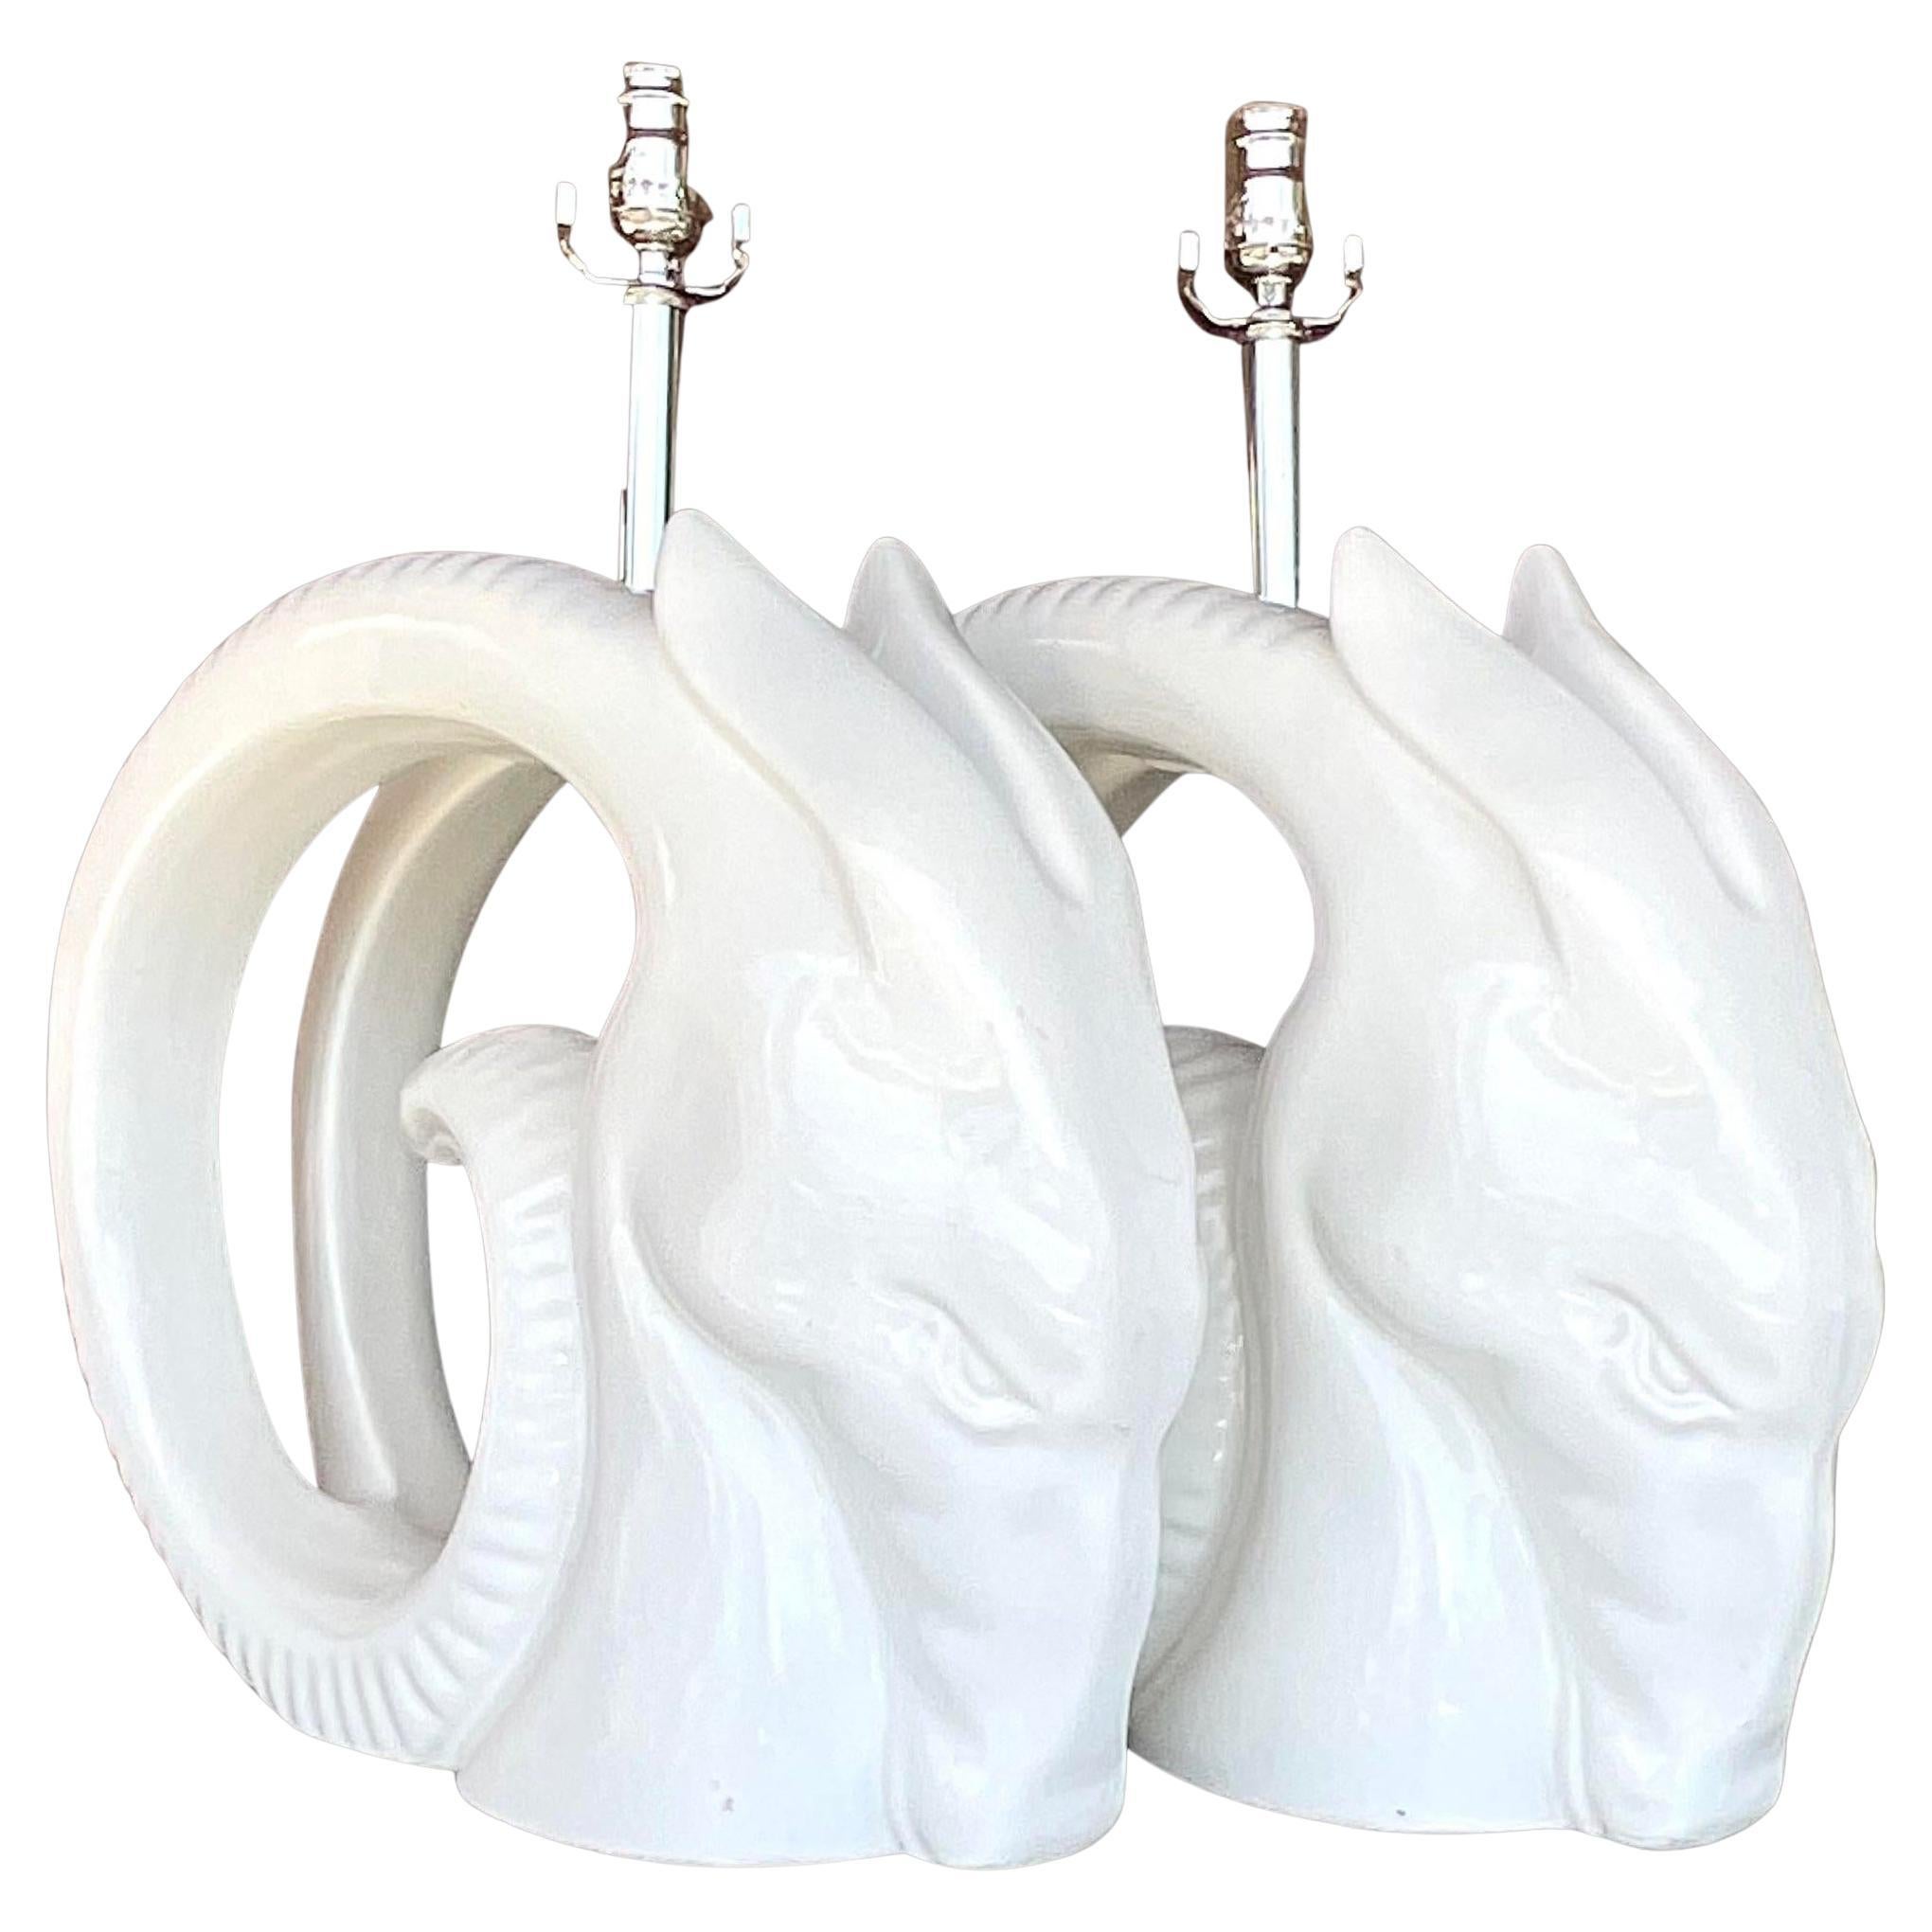 Vintage Monumental 80s Glazed Ceramic Rams Head Lamps - a Pair For Sale